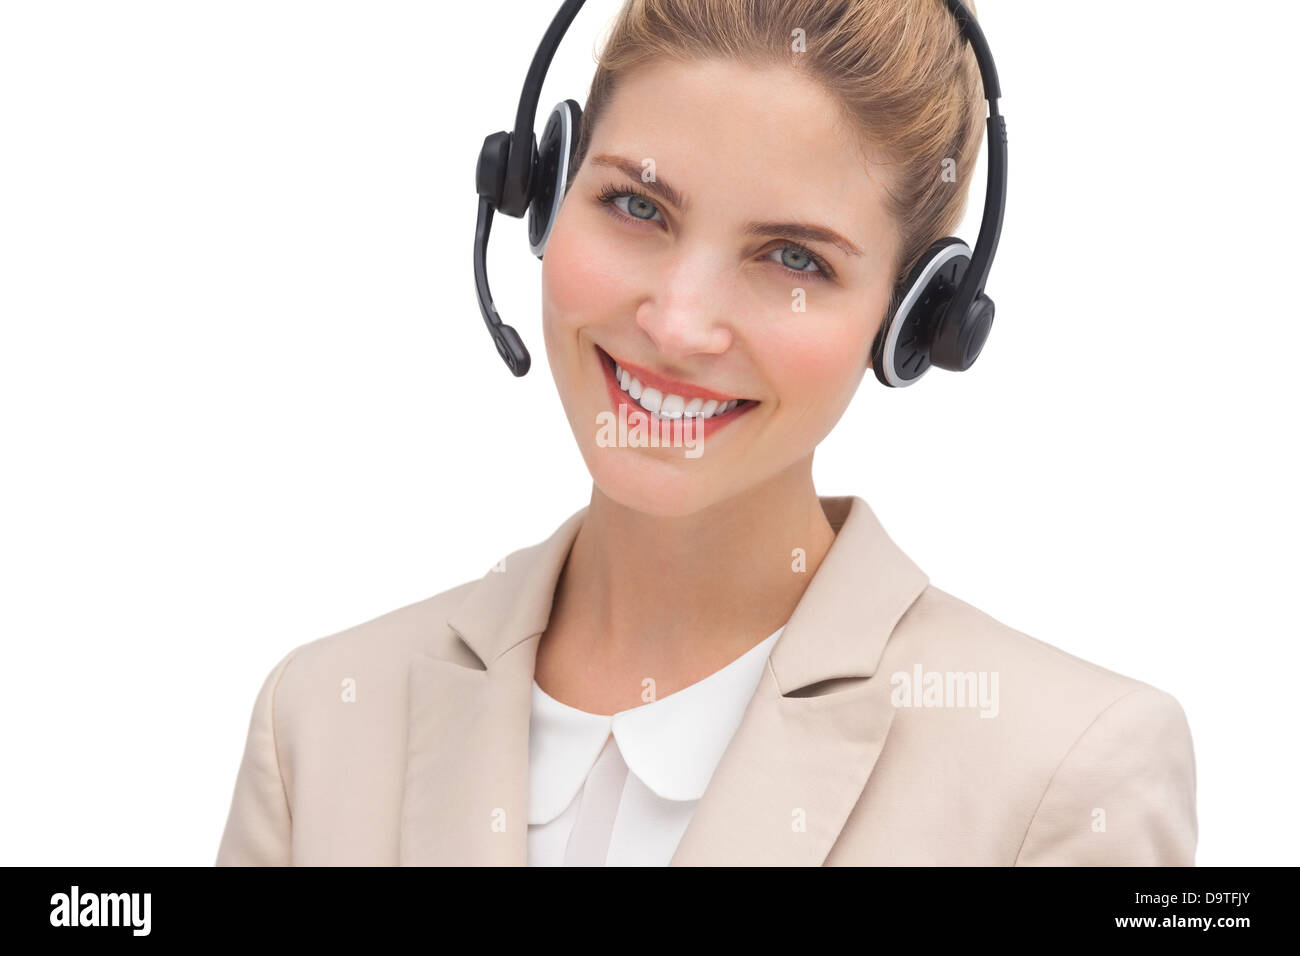 Smiling customer service agent Stock Photo